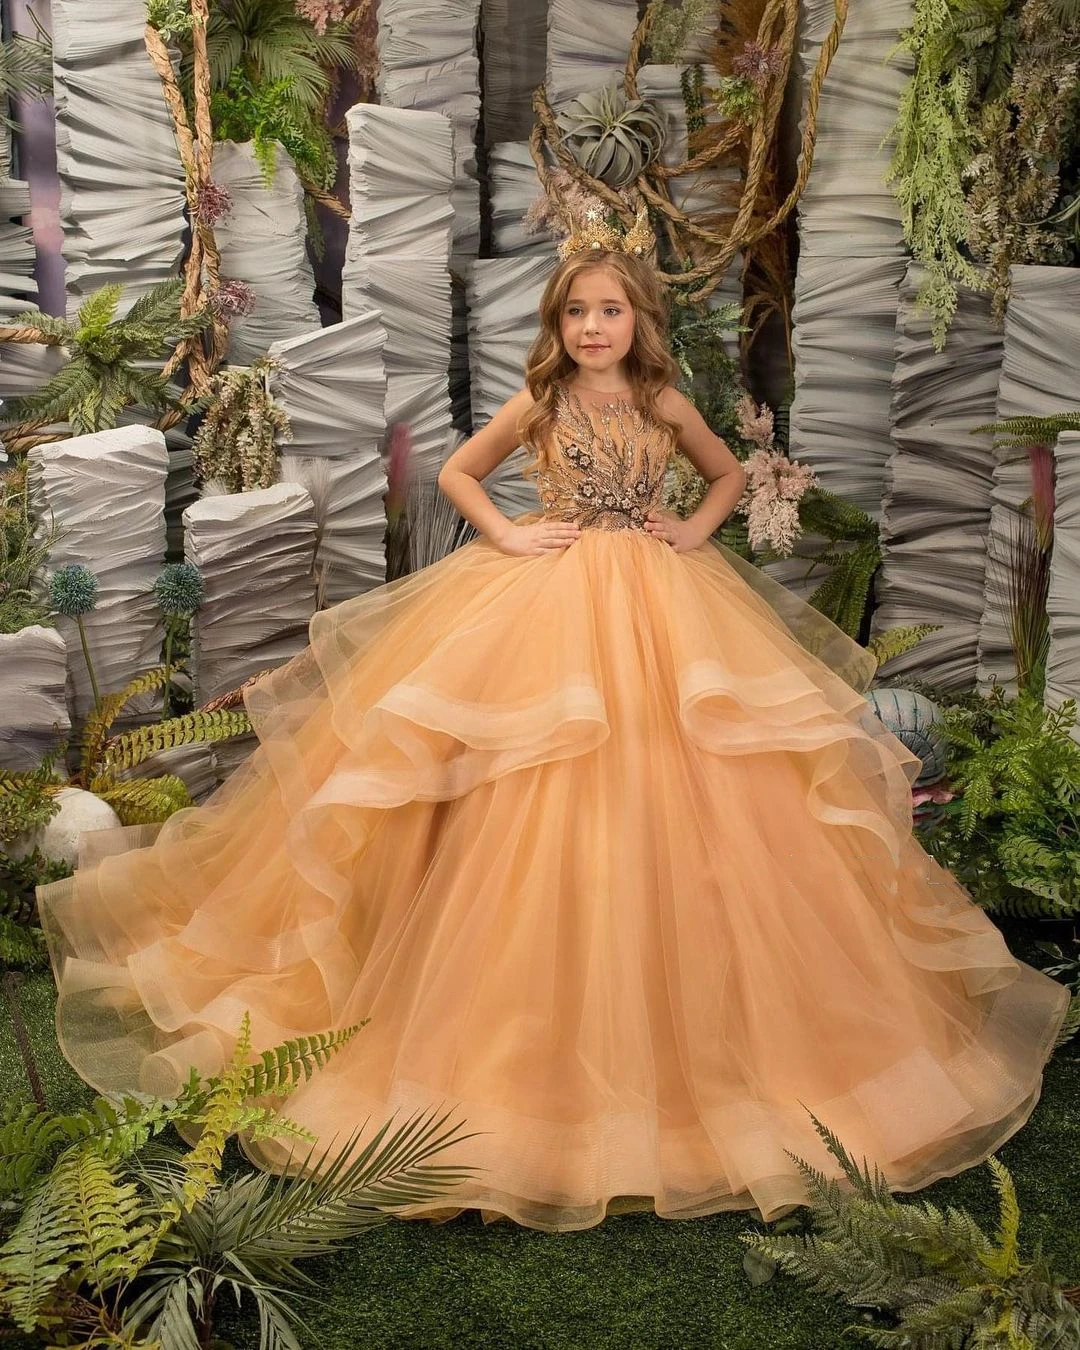 

Yellow Applique Flower Girl Dress For Wedding Ruffles Tulle Puffy Floor Length Princess Kids Pageant First Communion Ball Gown